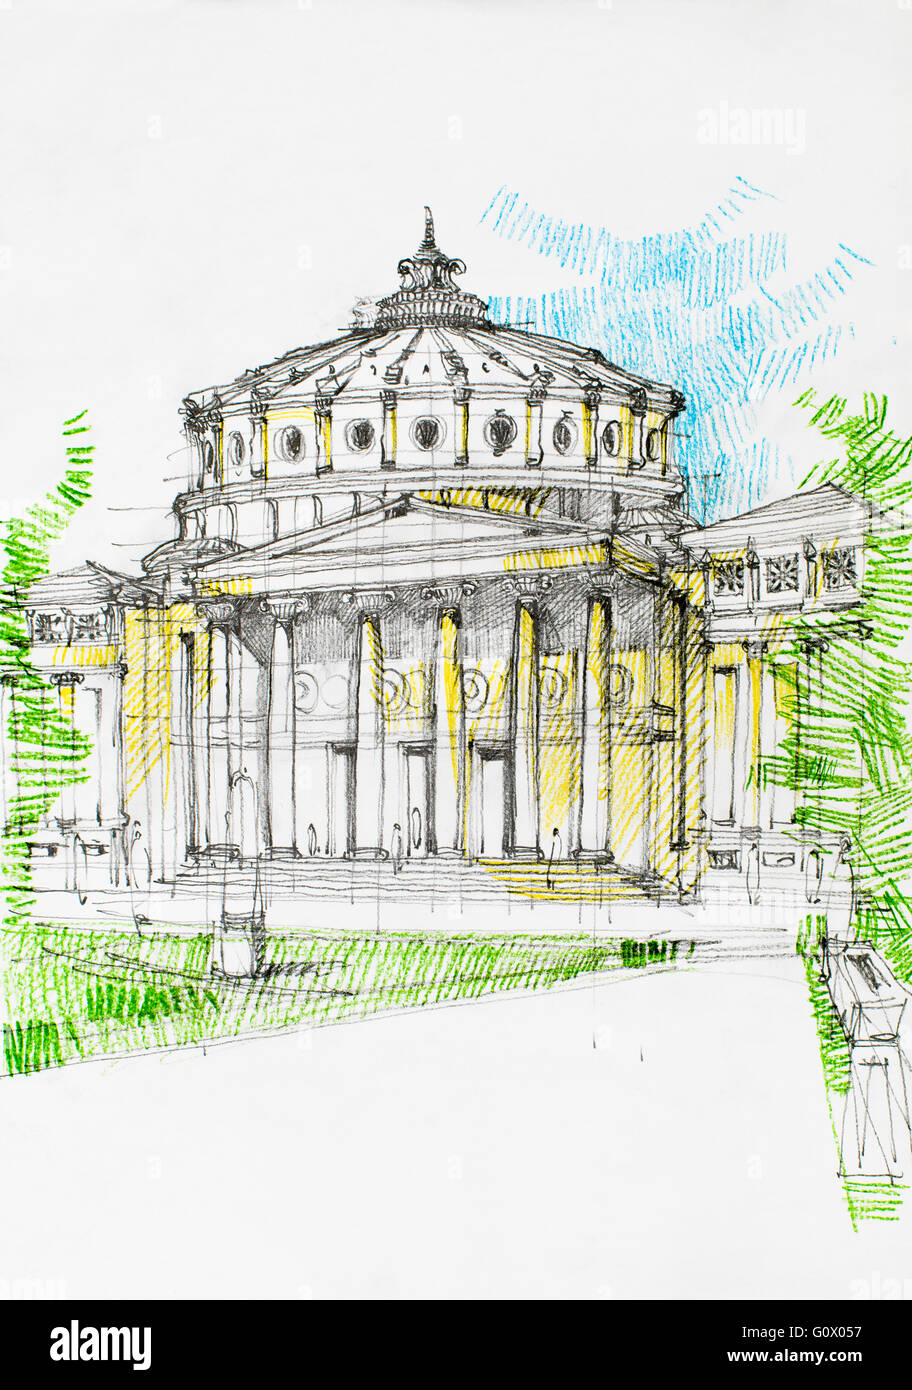 imposing construction hand drawn with a great cupola, opera house/museum drawn in pencil Stock Photo